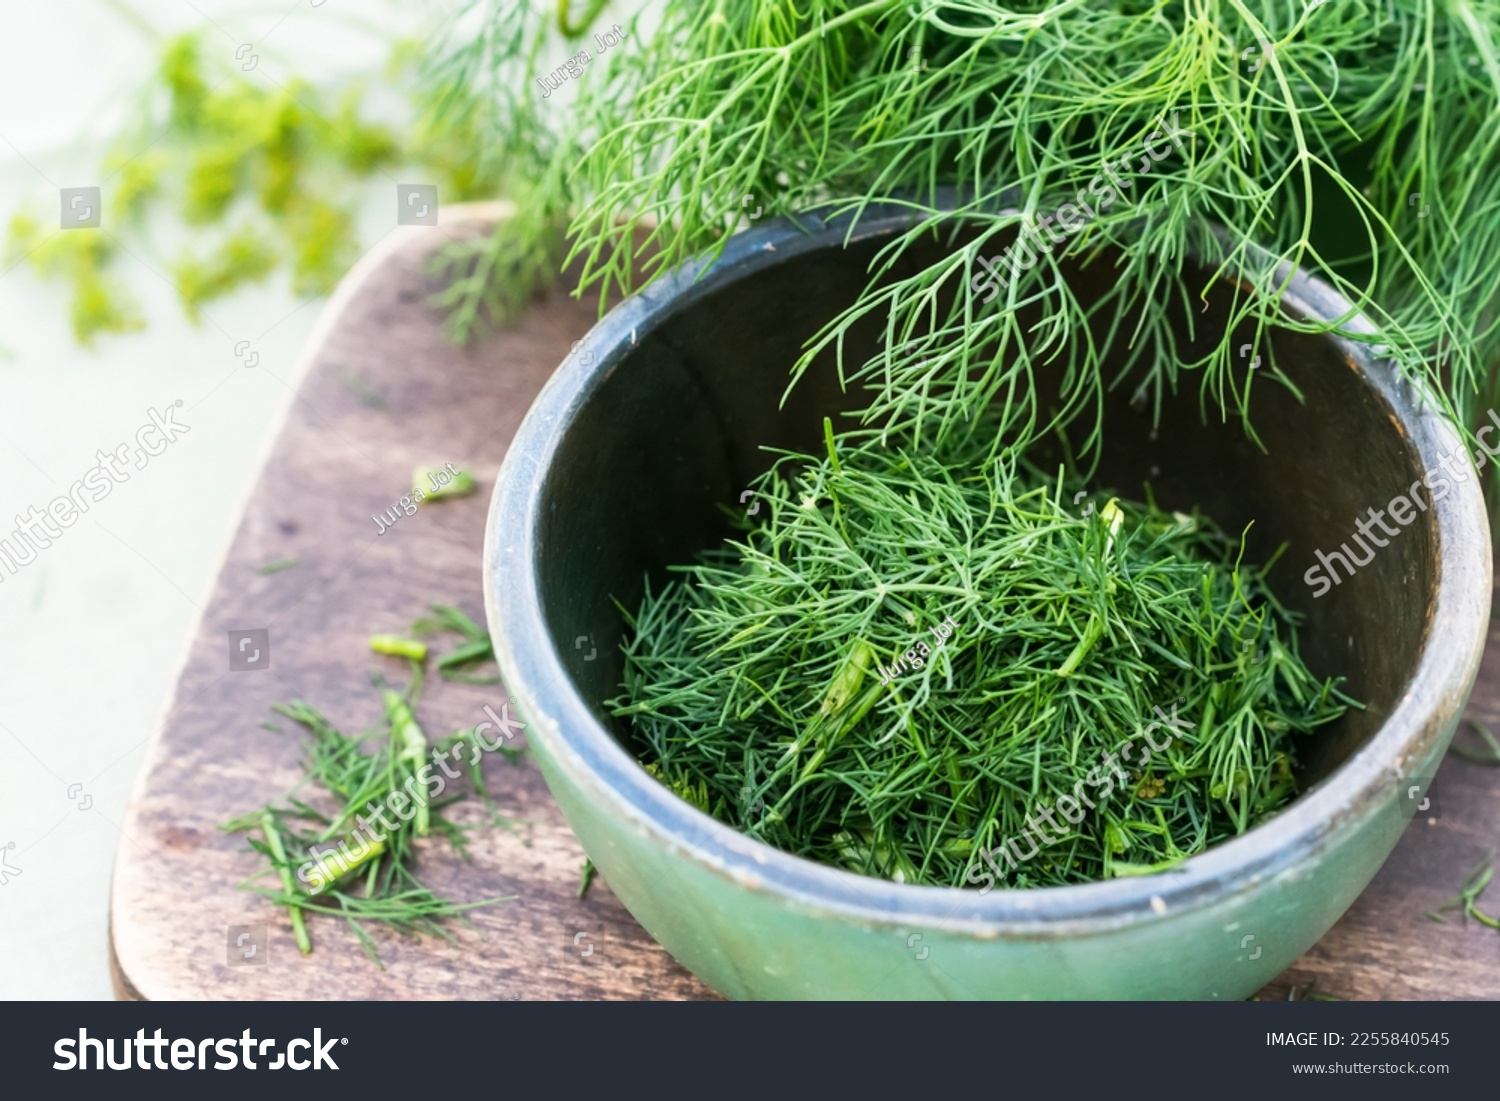 Just harvested cut fresh dills in bowl on brown cutting board on wooden table in summertime, cut dill leaves for flavouring food, flavouring herb concept #2255840545